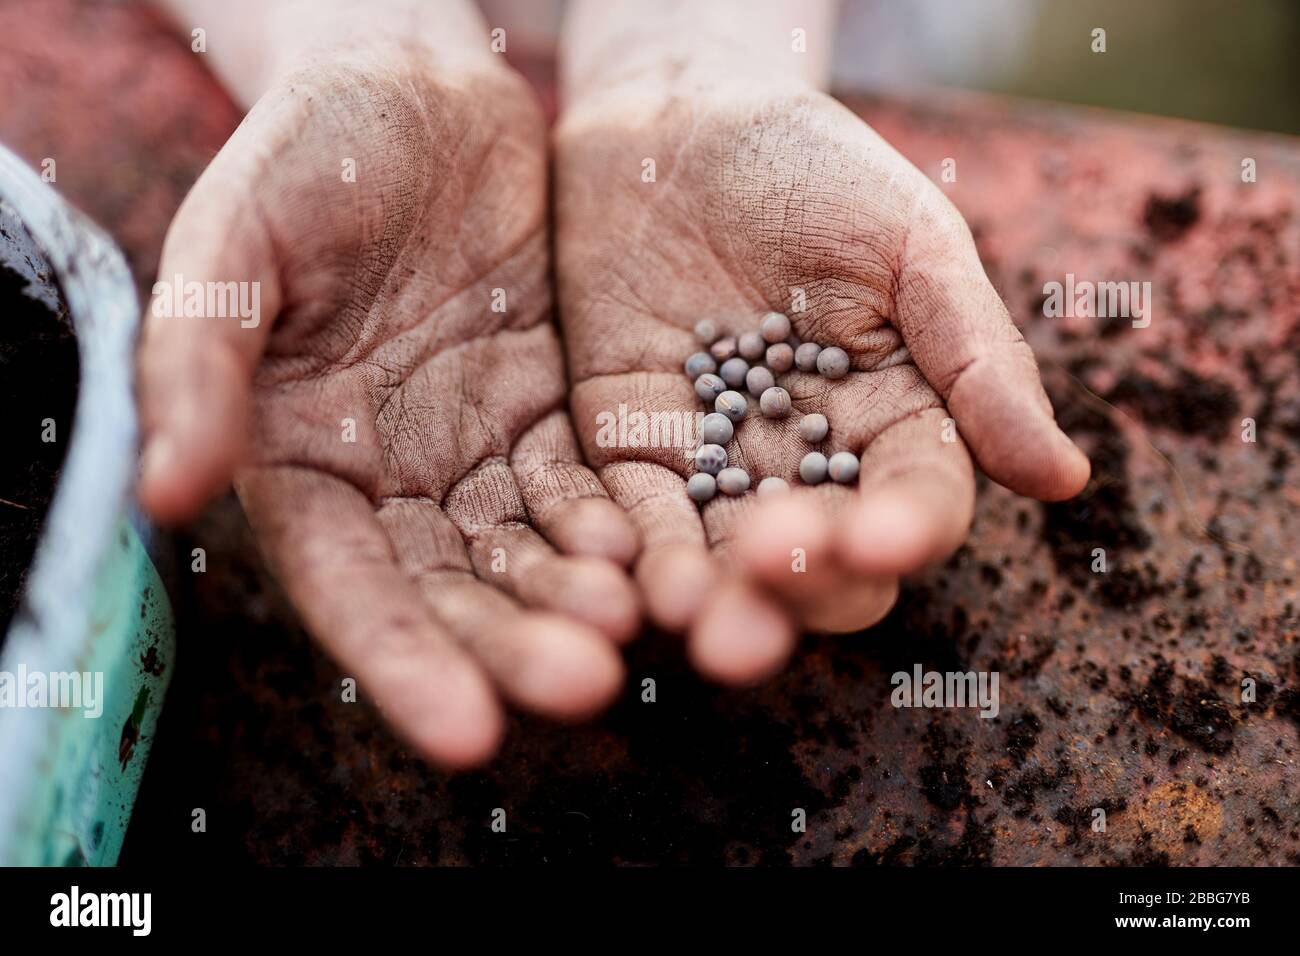 A pair of Primary school aged children hands holding plant seeds Stock Photo